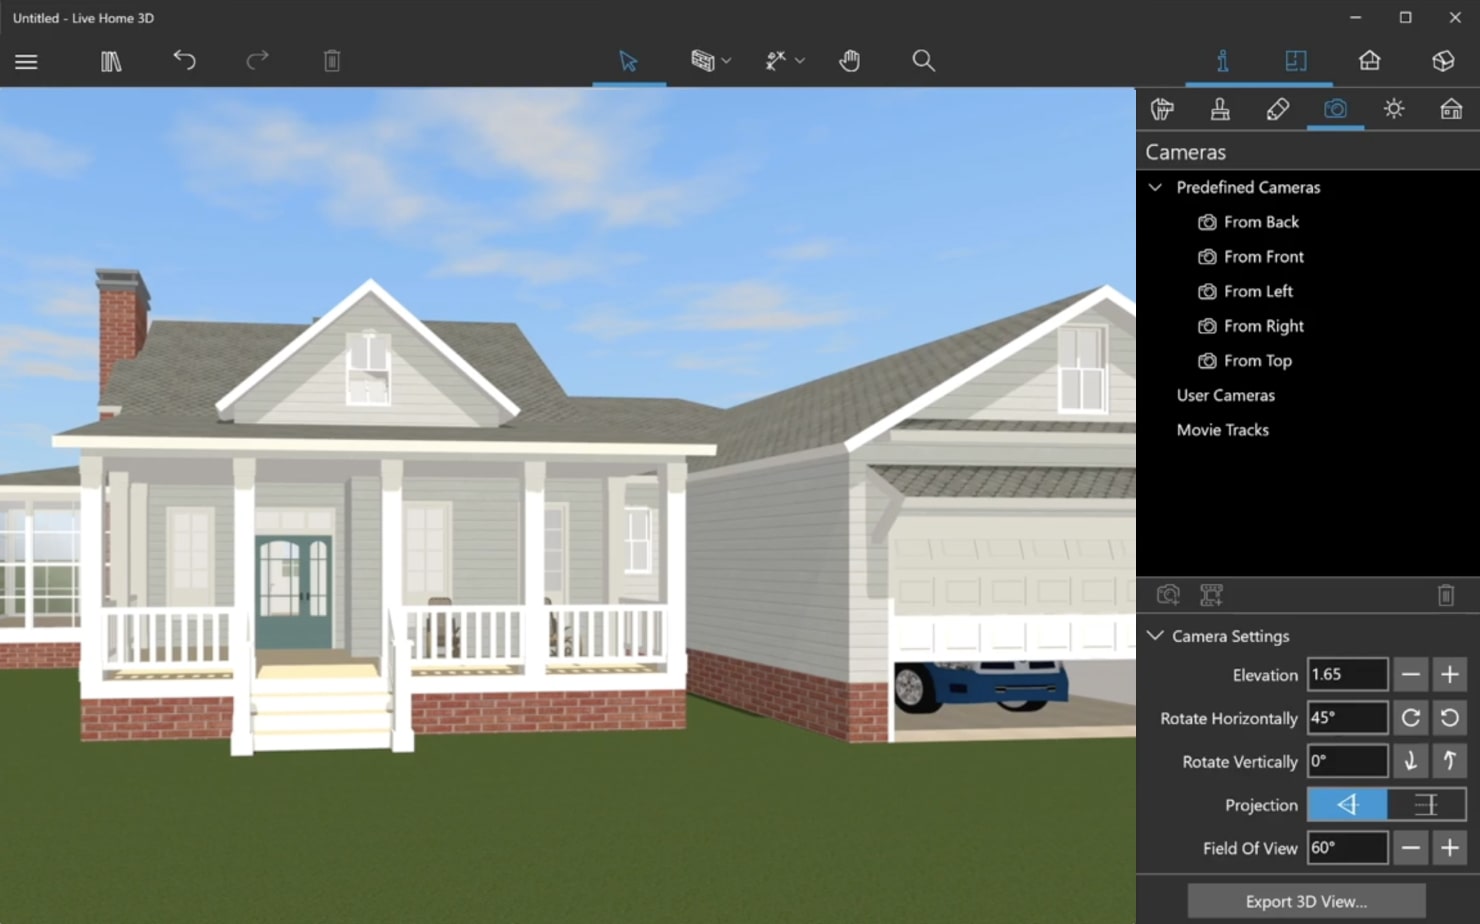 A project of a split level house created in Live Home 3D.